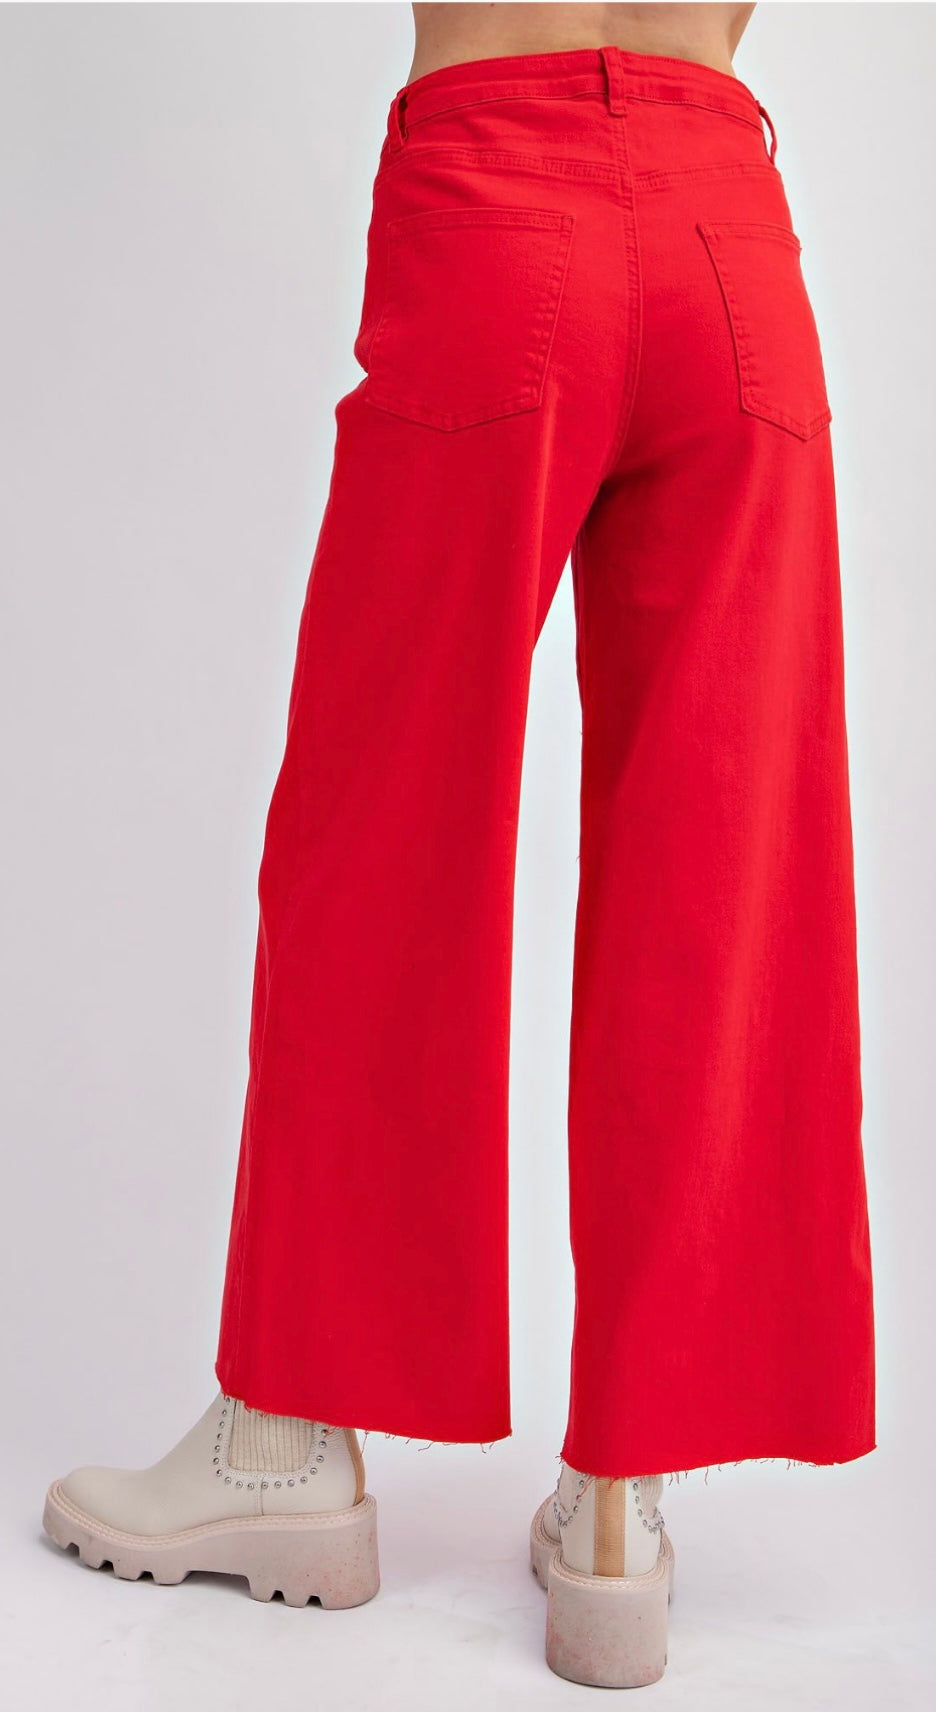 Hot Tamale Jeans